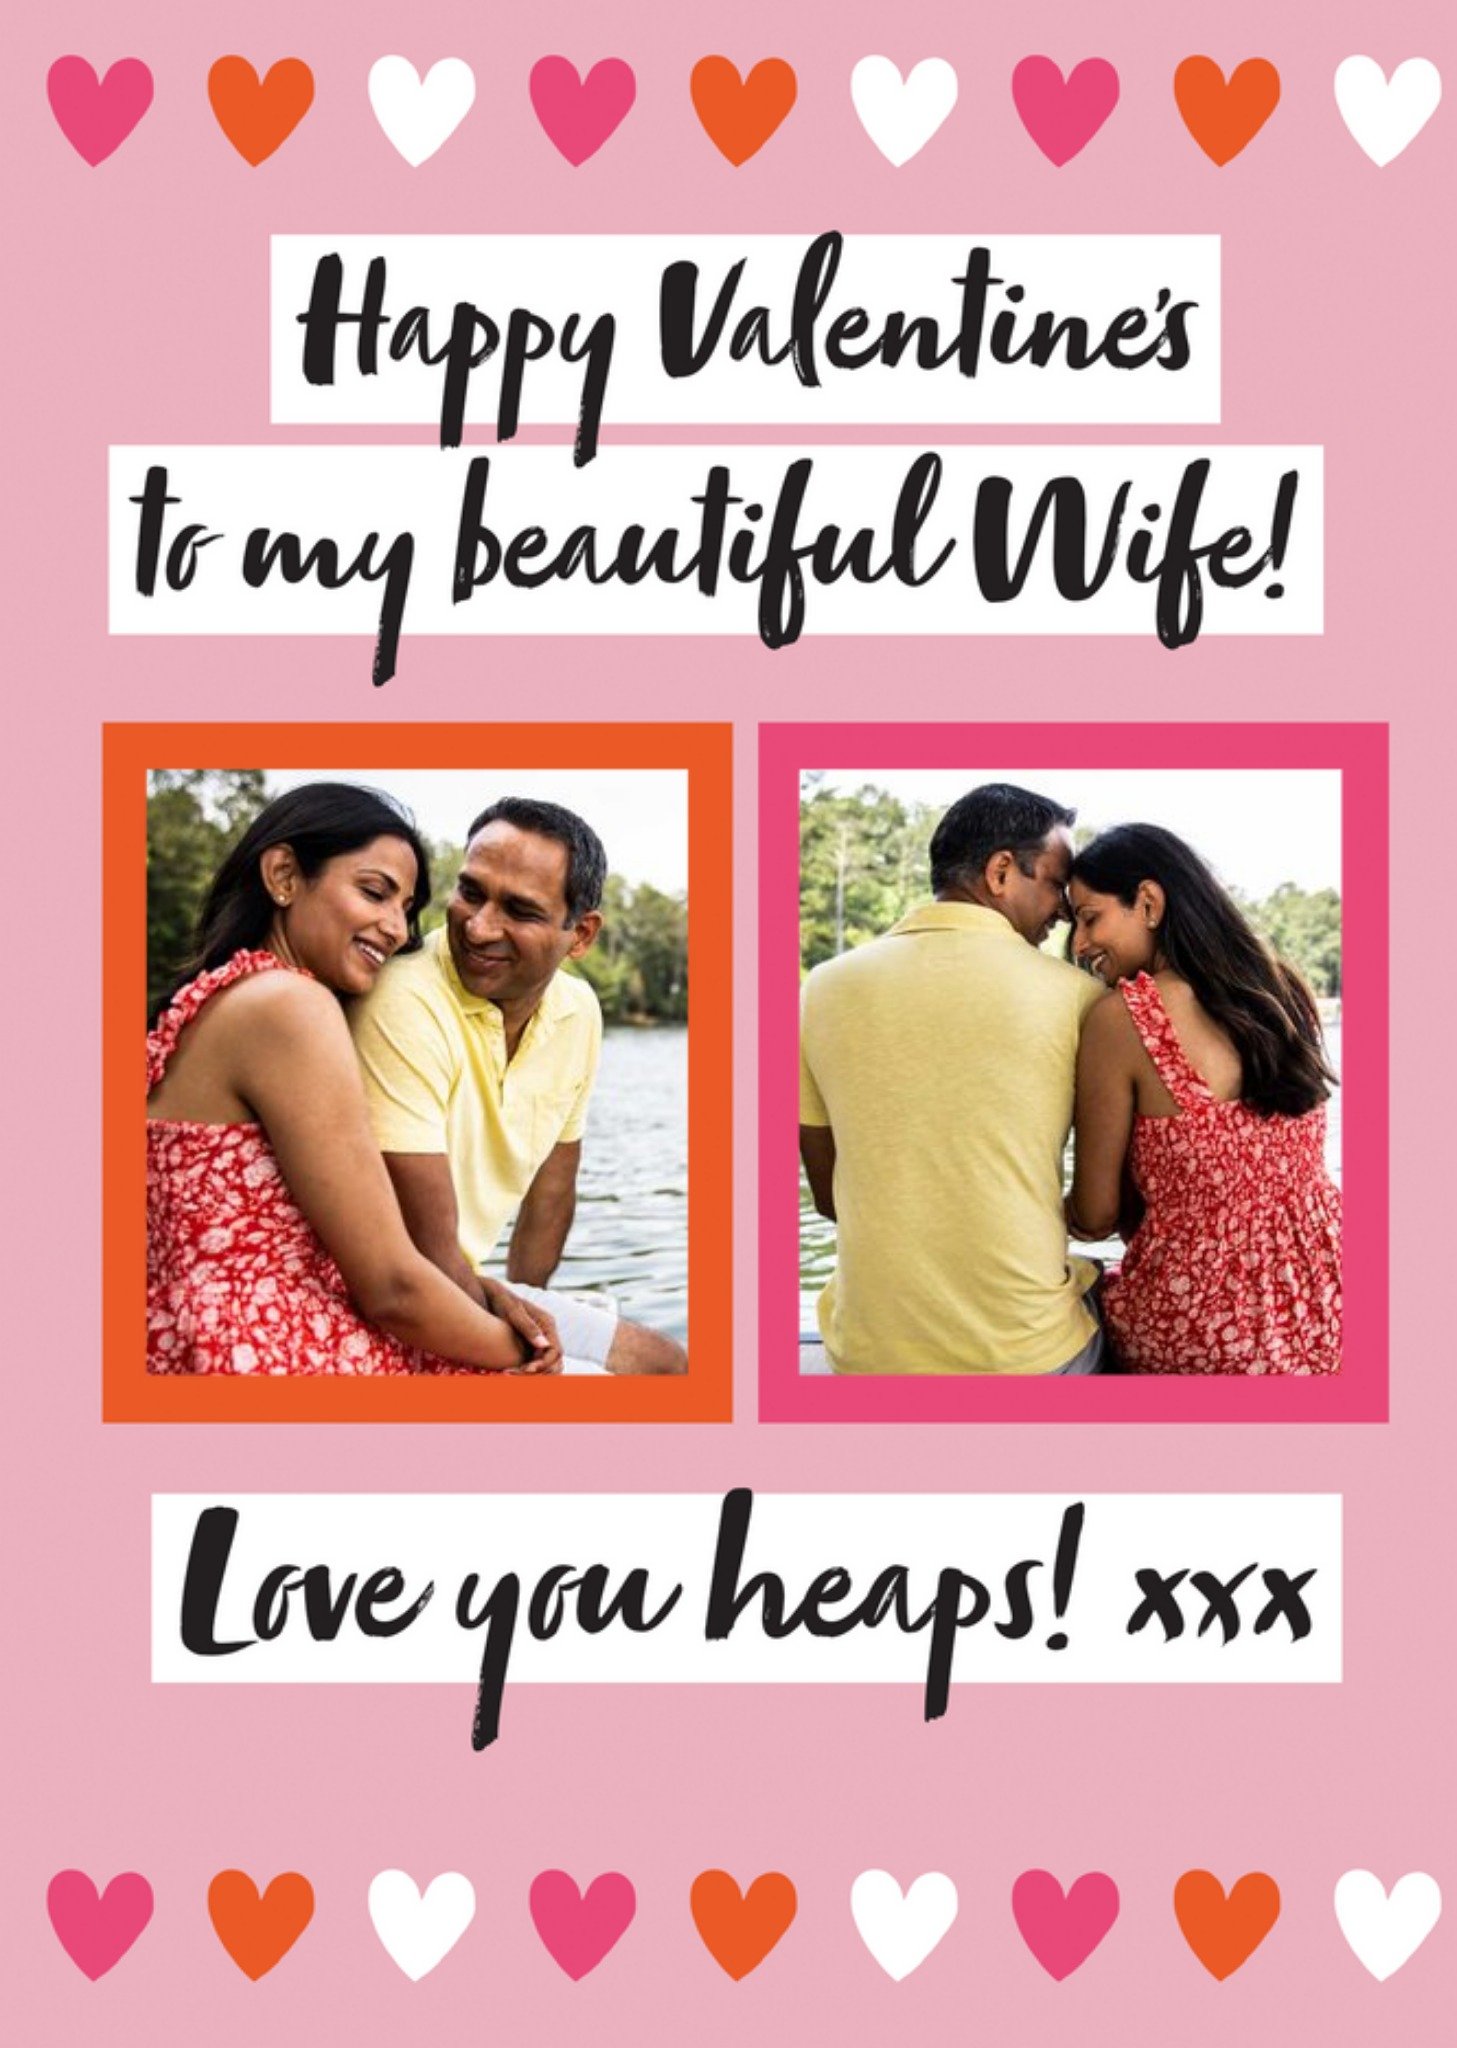 Moonpig Happy Valentine's To My Beautiful Wife Love You Heaps Photo Upload Valentine's Card, Large